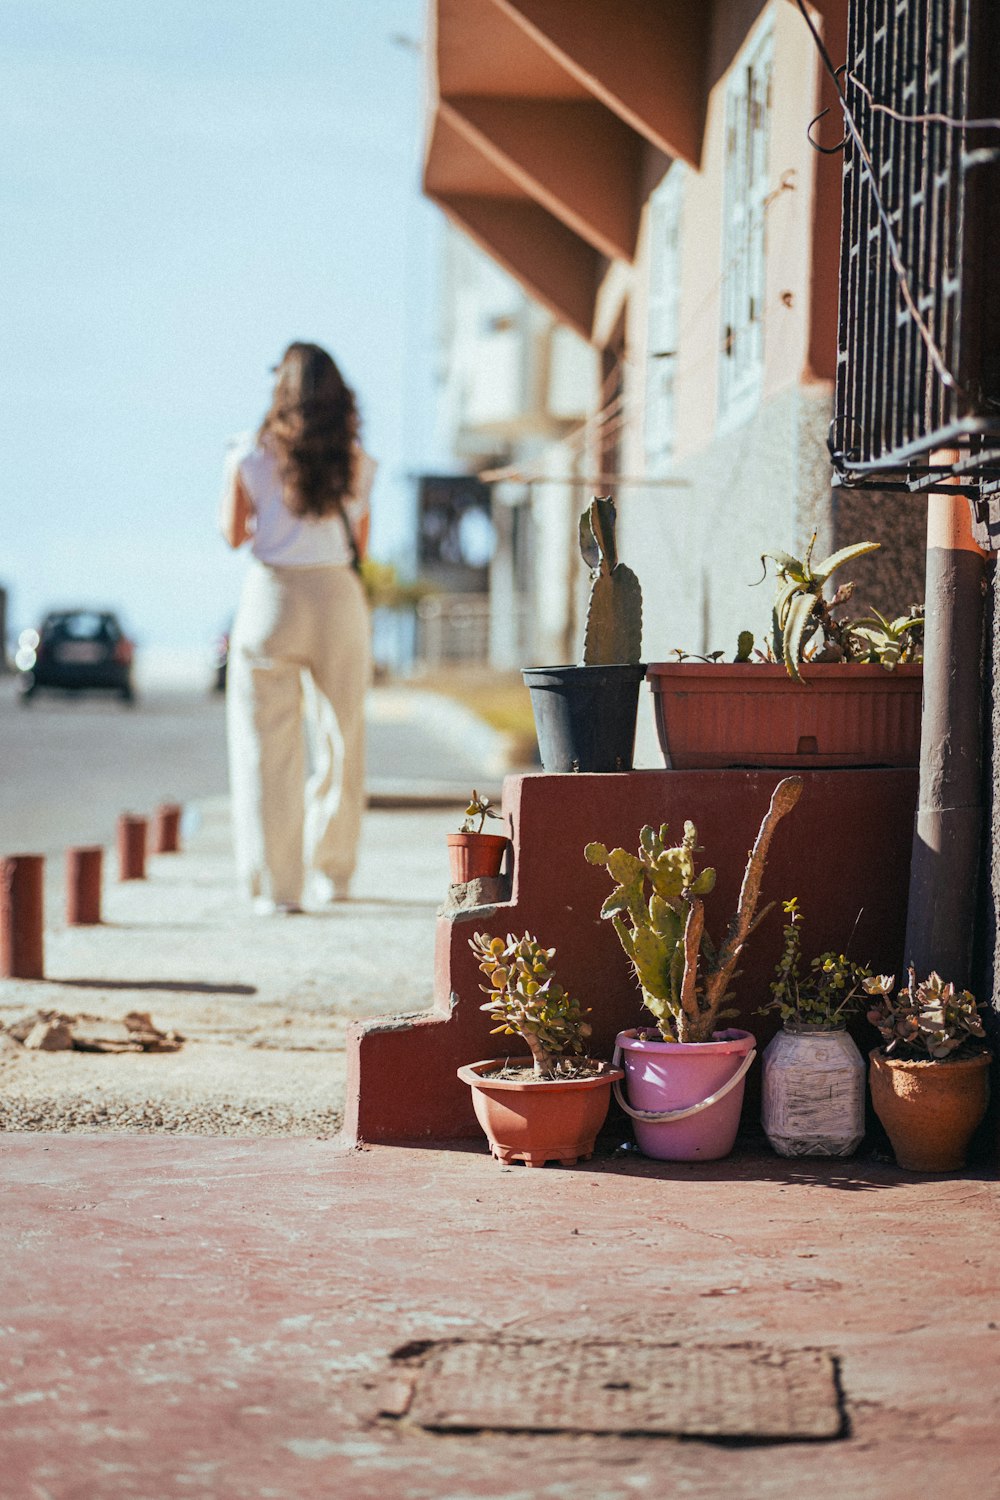 a woman walking down a sidewalk next to potted plants